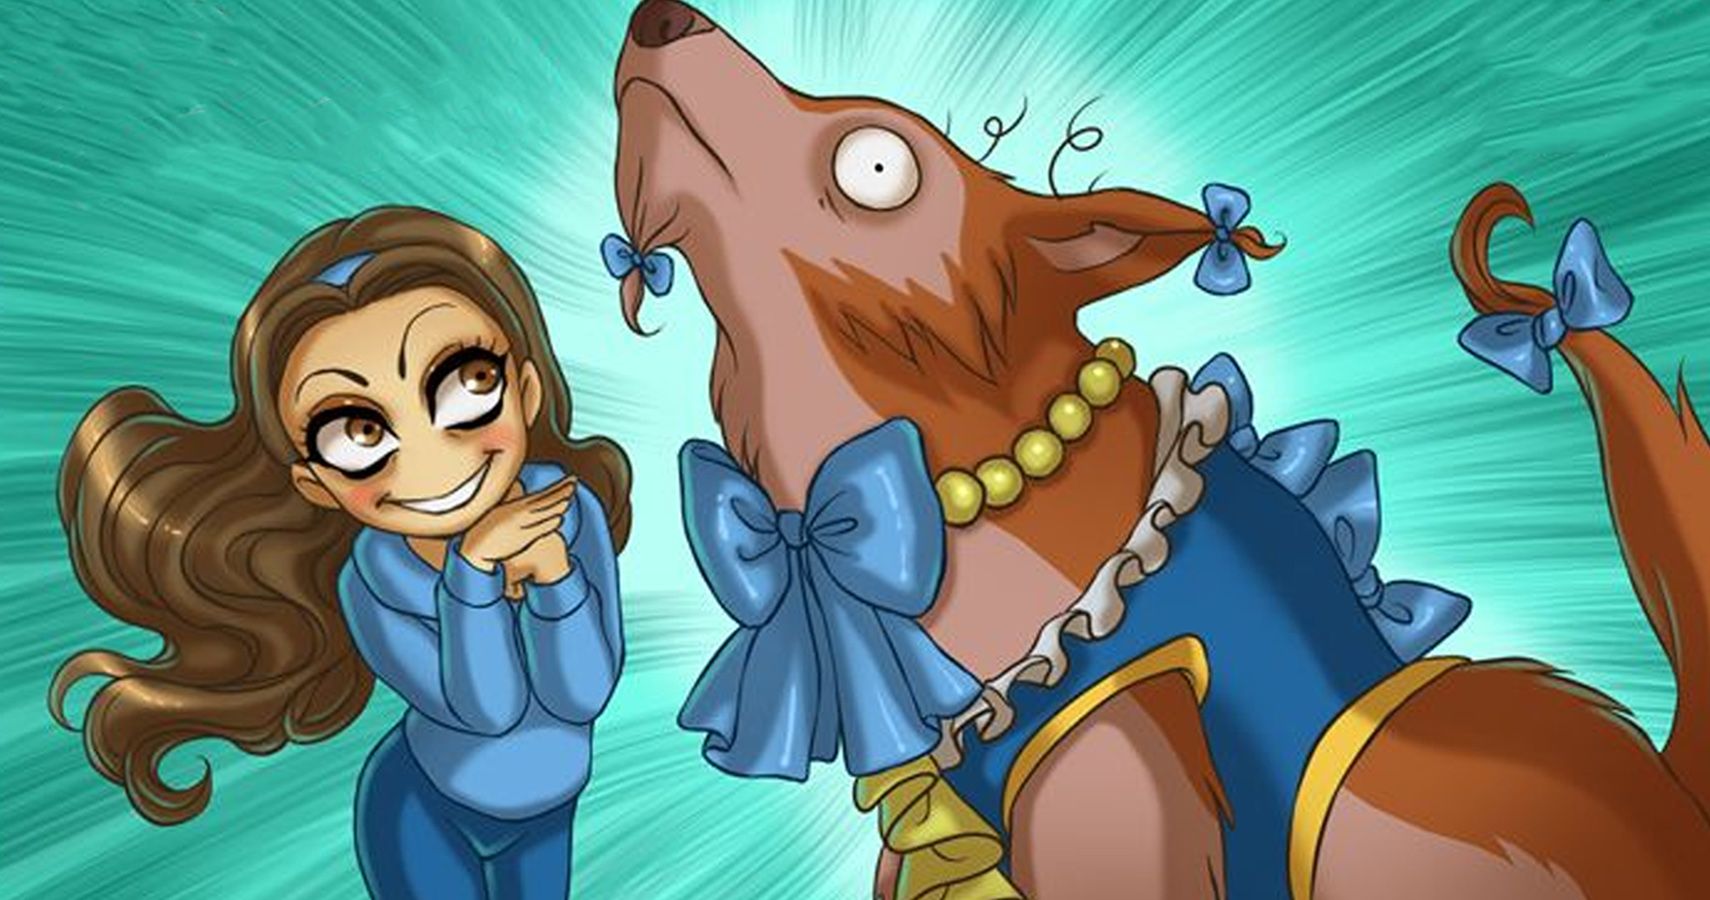 Disney: 25 Beauty And The Beast Comics That Are Extra Sweet